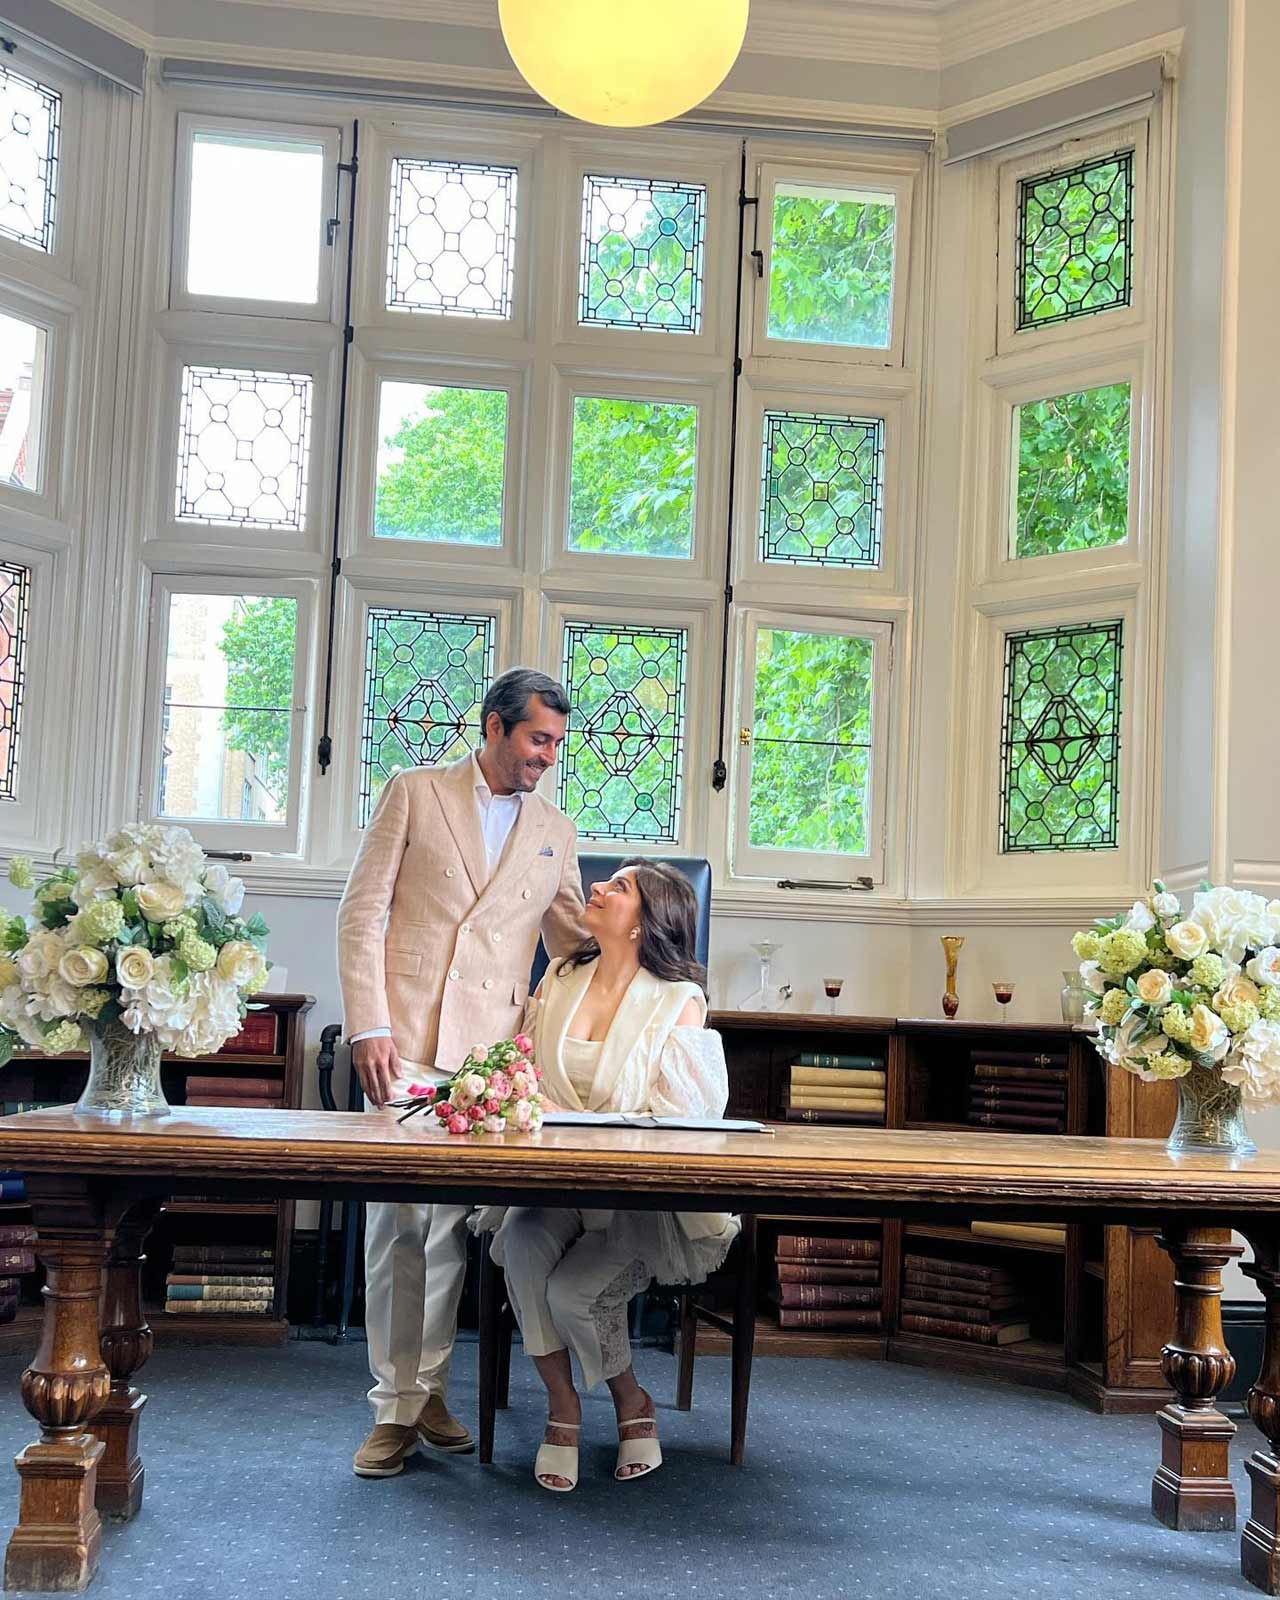 Kanika Kapoor could be seen wearing a lacey white pantsuit to her church wedding, while her husband Gautam chose to wear a beige coloured coat and white coloured shirt and pants.